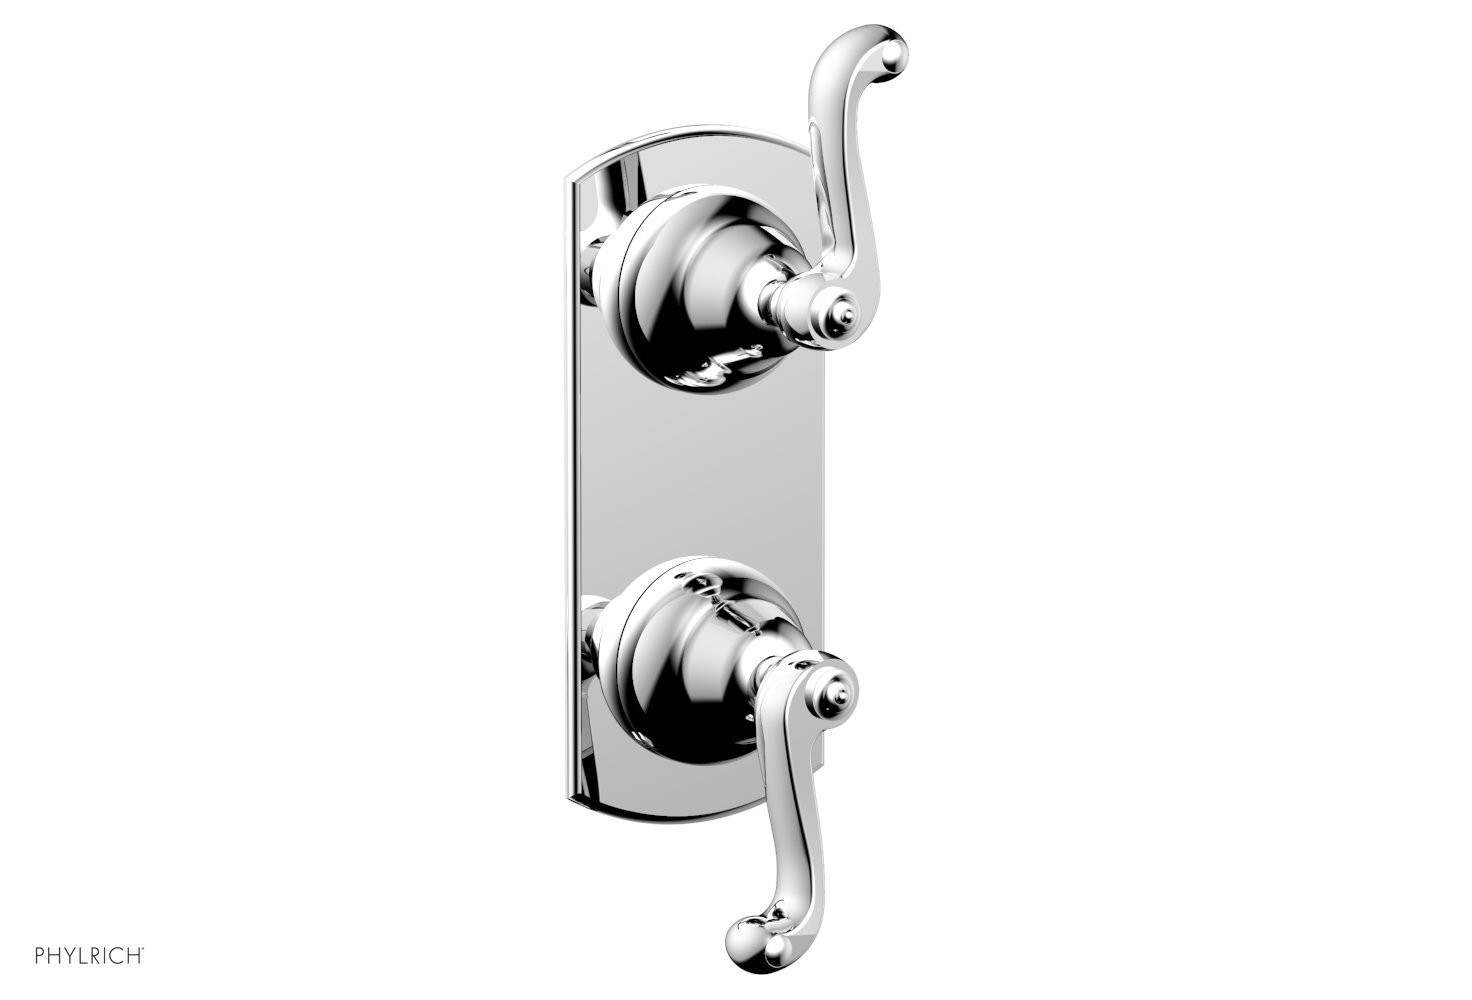 PHYLRICH 4-426 REVERE & SAVANNAH WALL MOUNT TWO CURVED LEVER HANDLES MINI THERMOSTATIC VALVE WITH VOLUME CONTROL OR DIVERTER TRIM